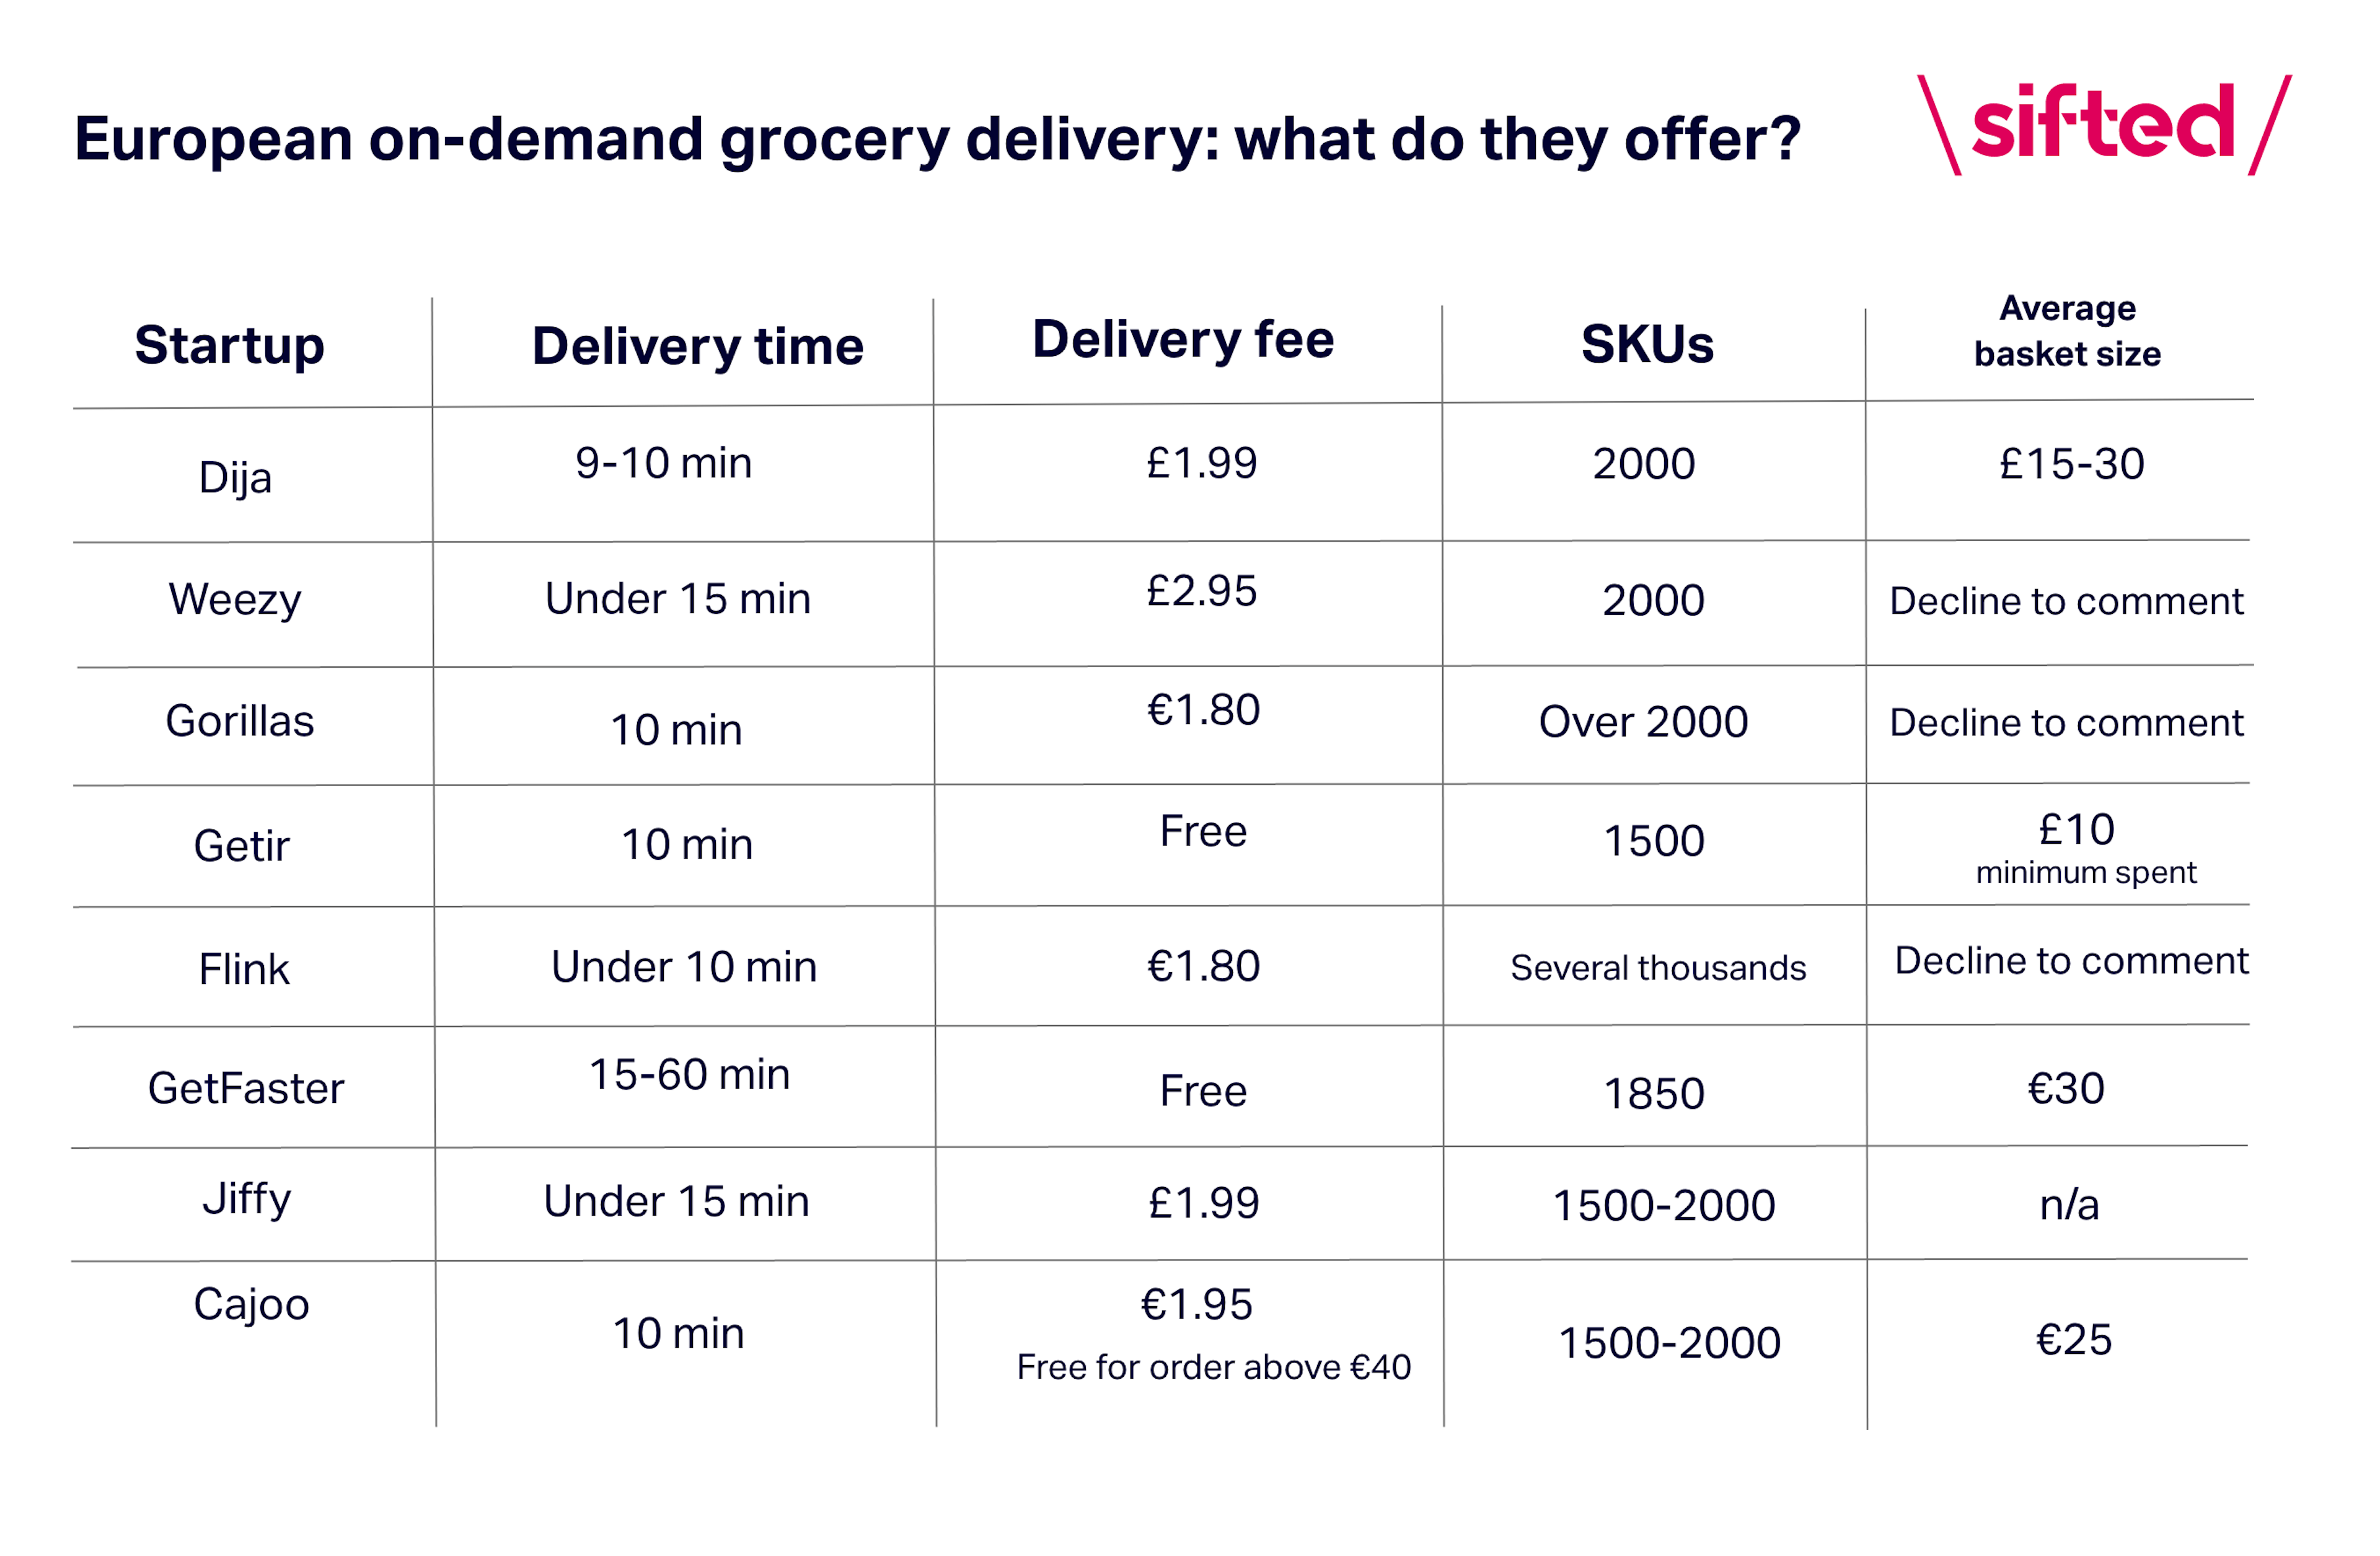 On-demand grocery delivery: The competitors, compared